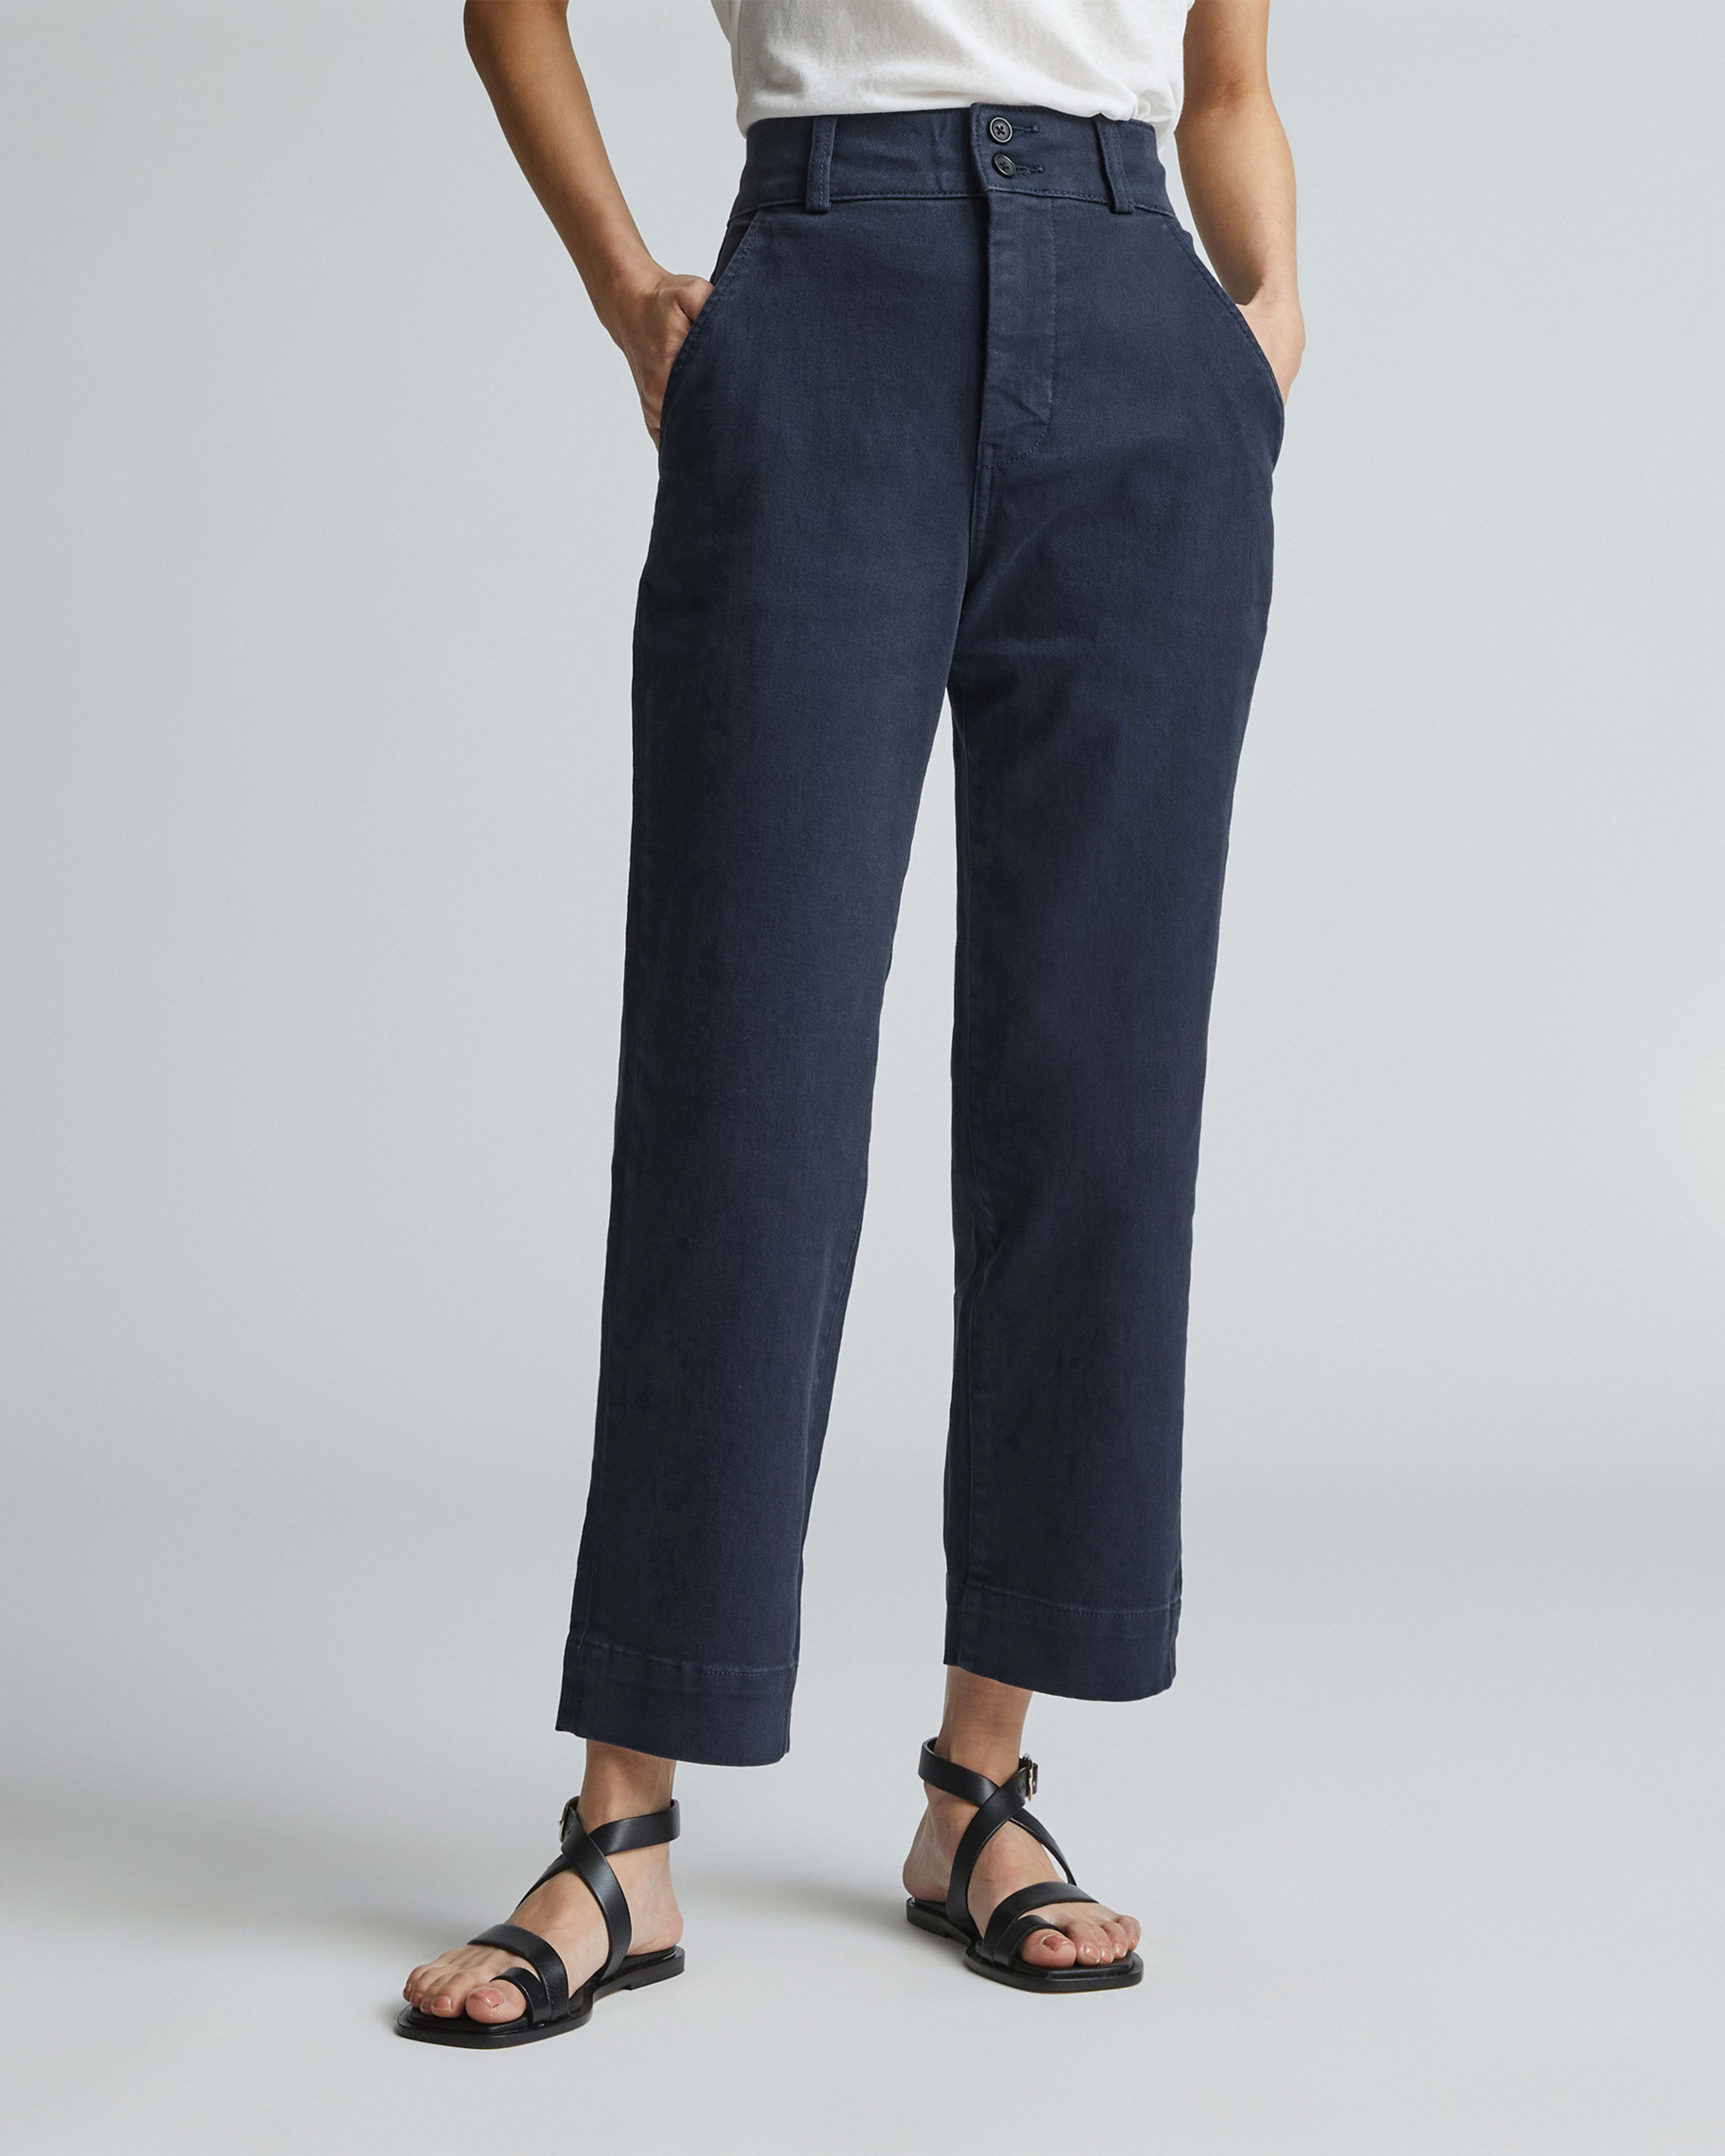 Everlane Straight Leg Crop Pant, Straight Leg Pant & Utility Barrel Pant  Review: How they compare – PhD in Clothes